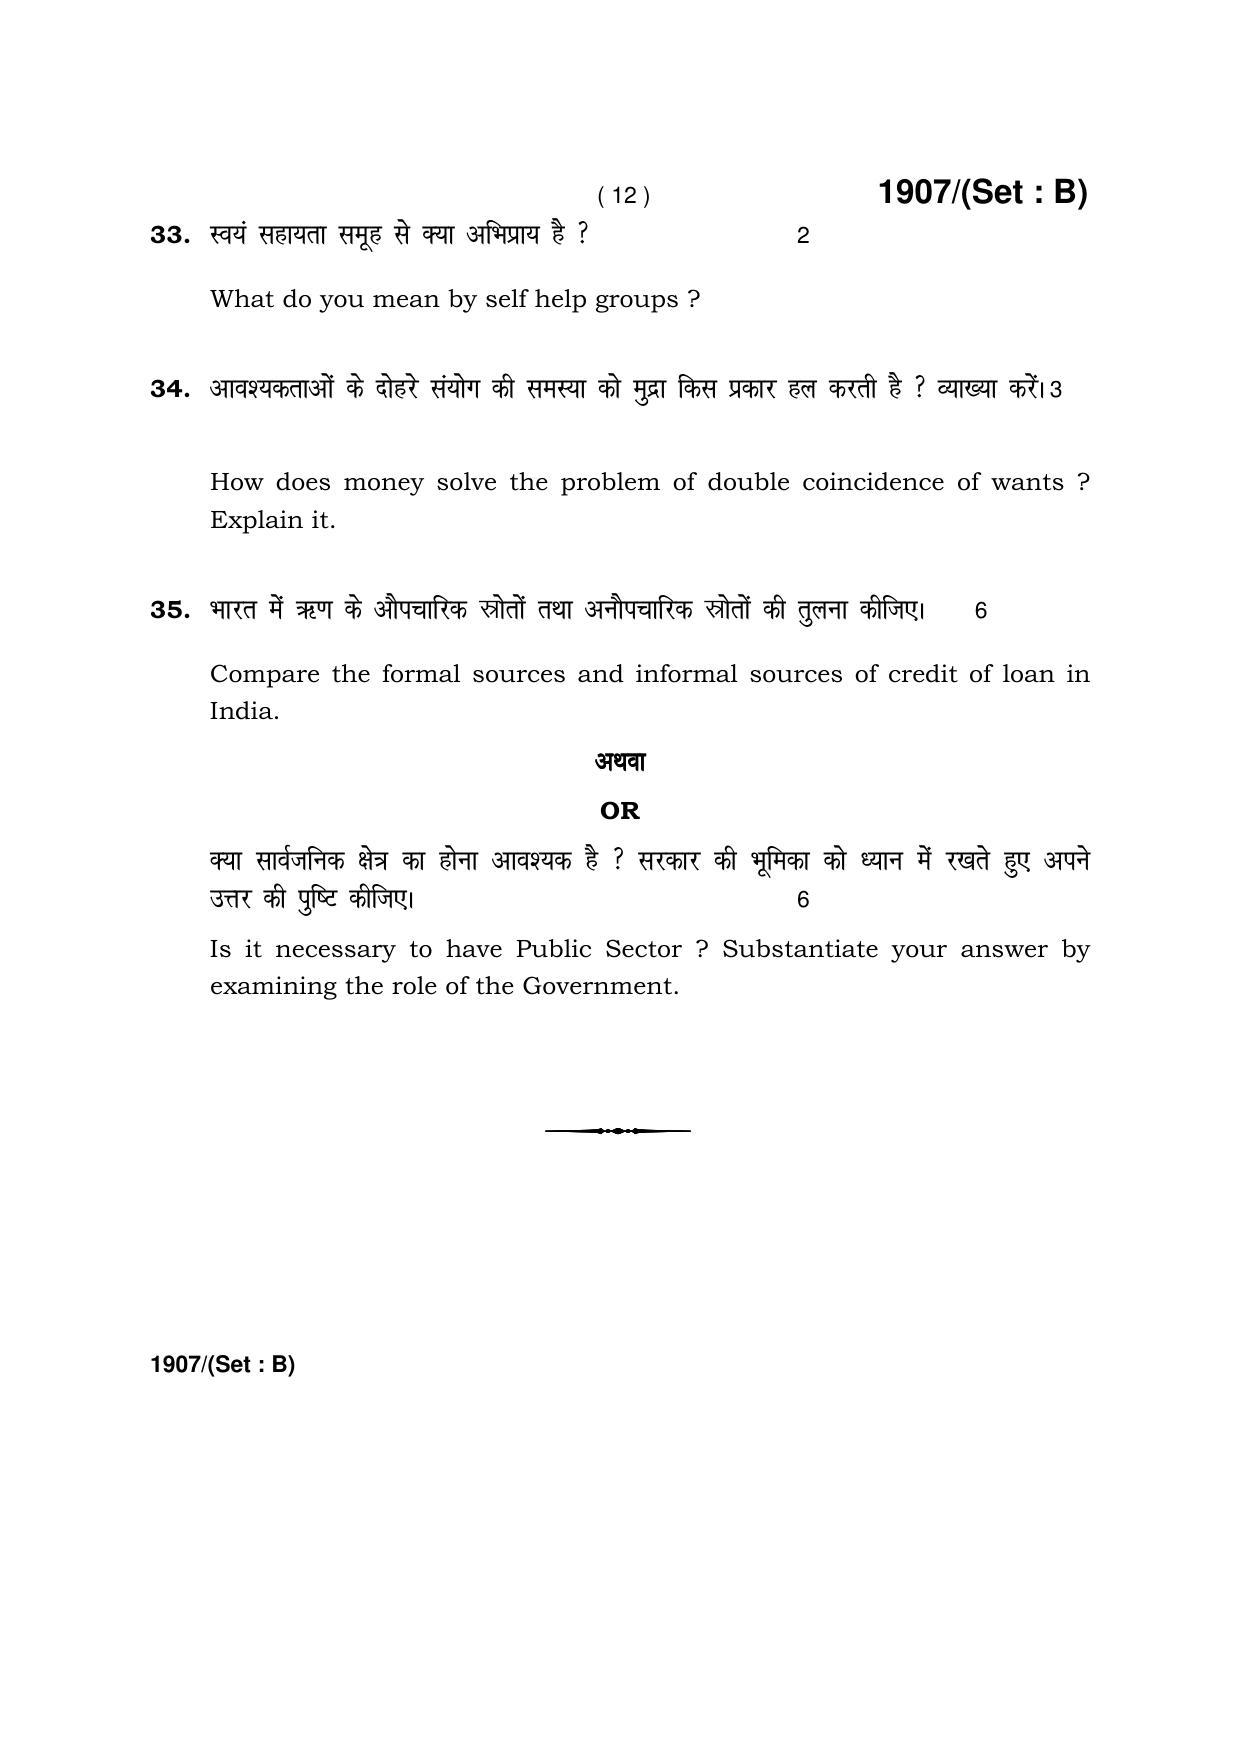 Haryana Board HBSE Class 10 Social Science -B 2017 Question Paper - Page 12